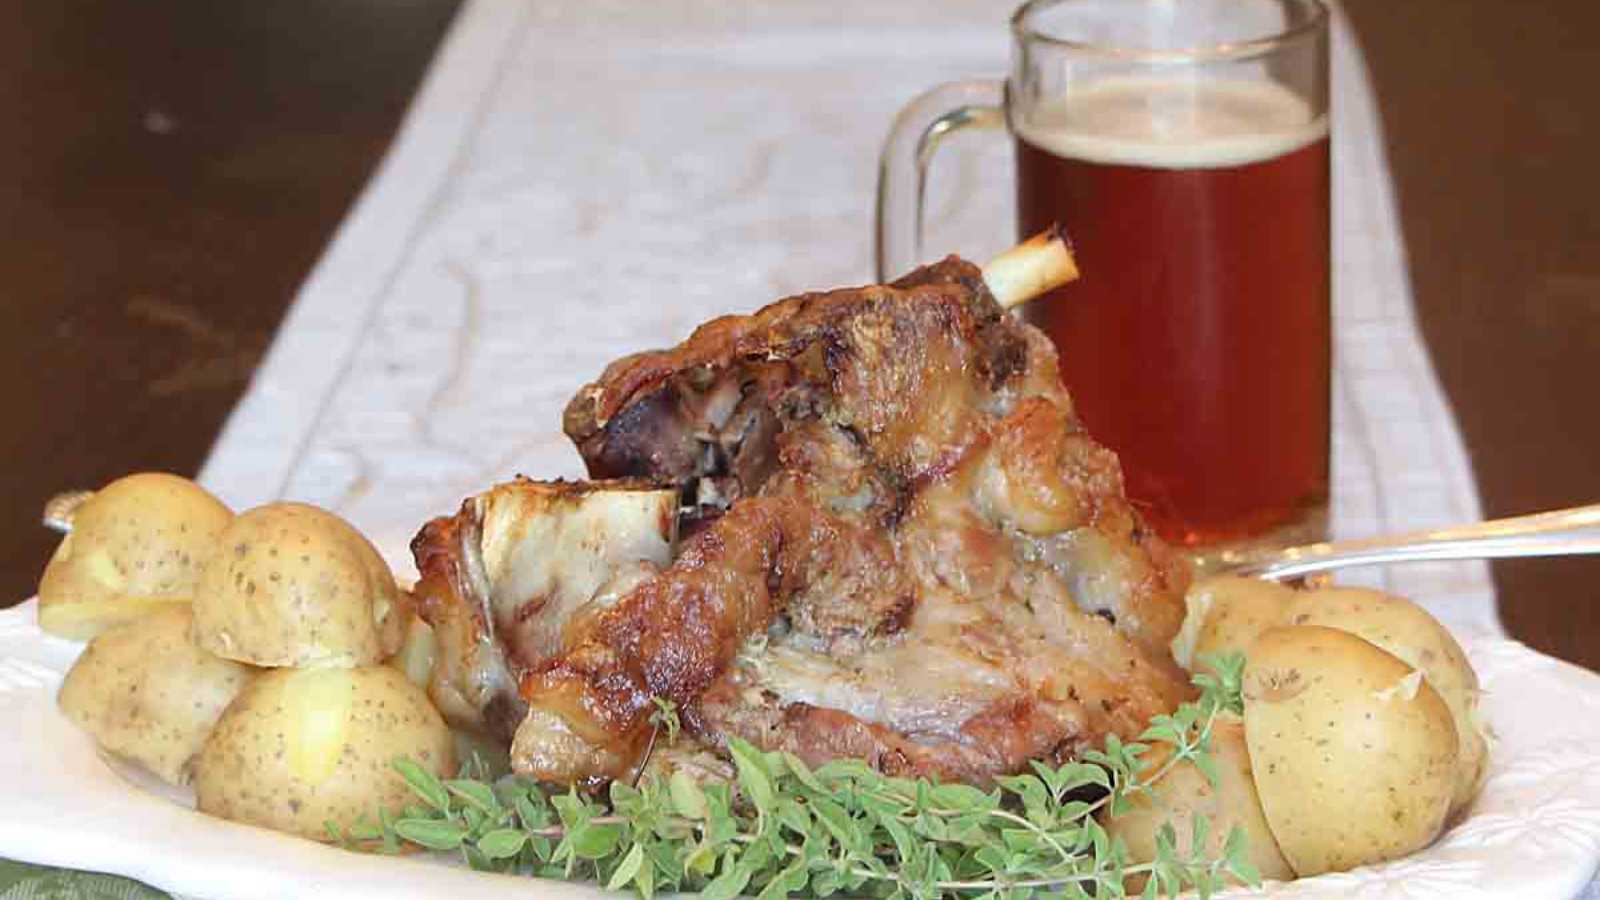 A plate of crispy pork hock and boiled potatoes, along with a pint of beer.